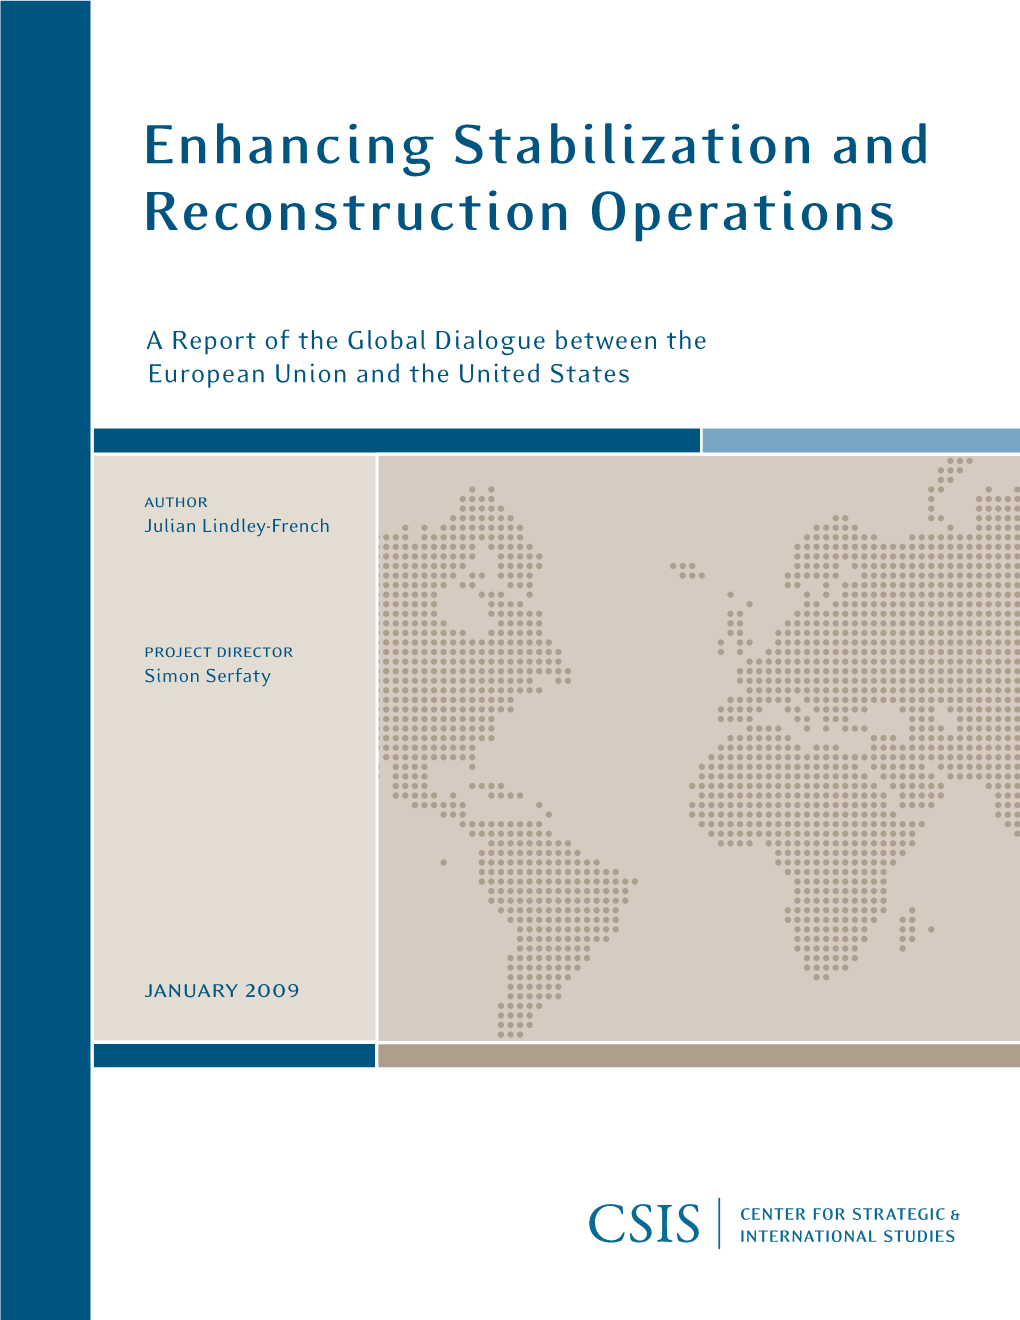 Enhancing Stabilization and Reconstruction Operations